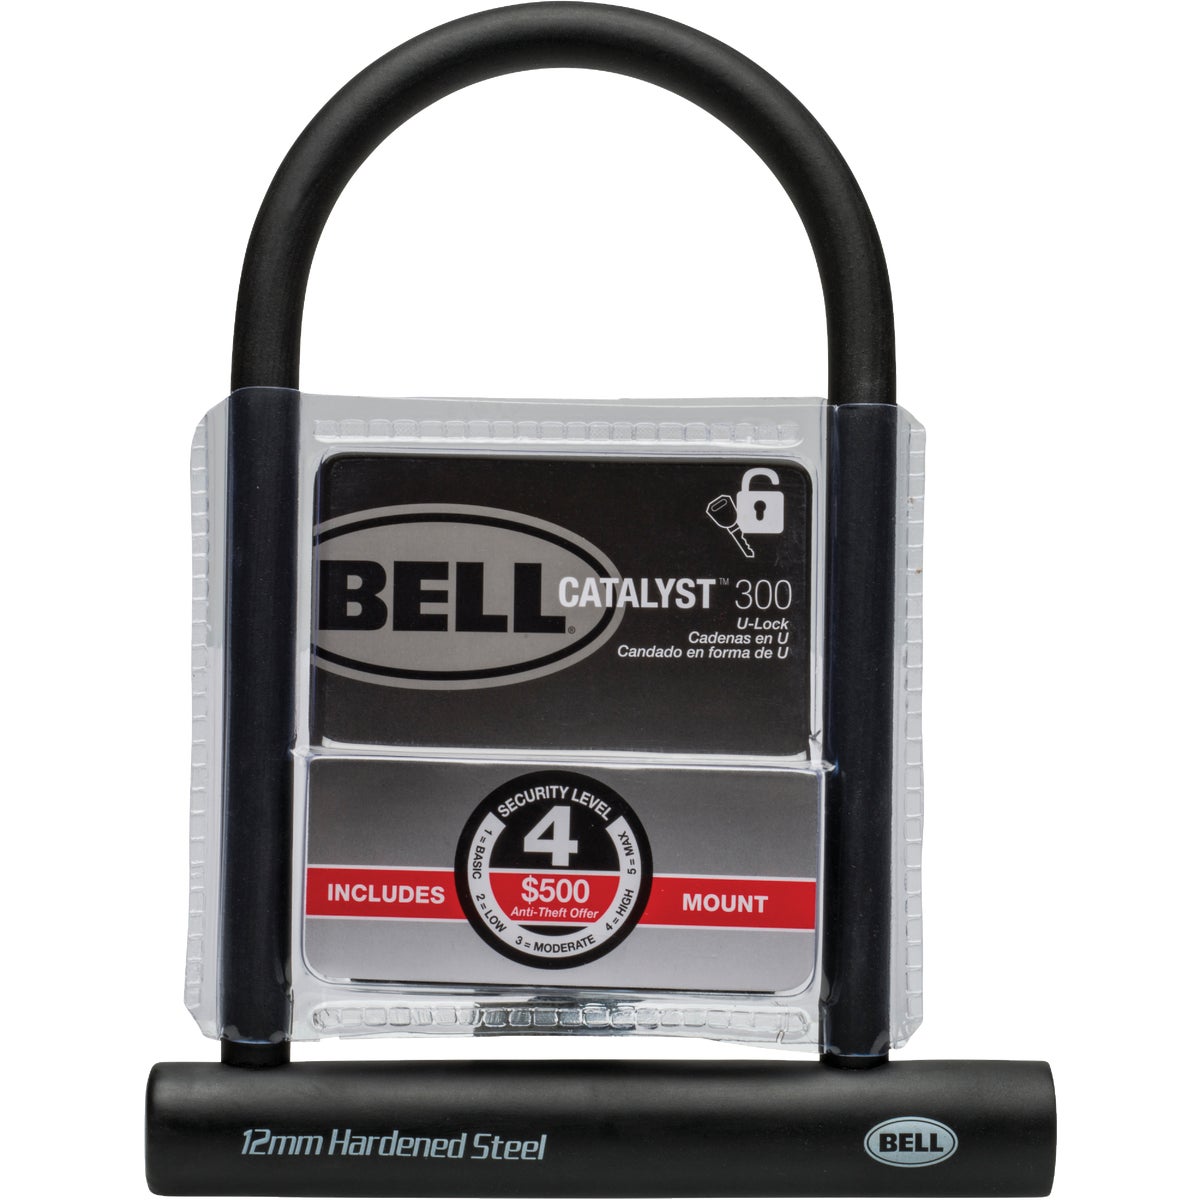 Item 812978, 8-inch hardened steel shackle and crossbar for maximum security.